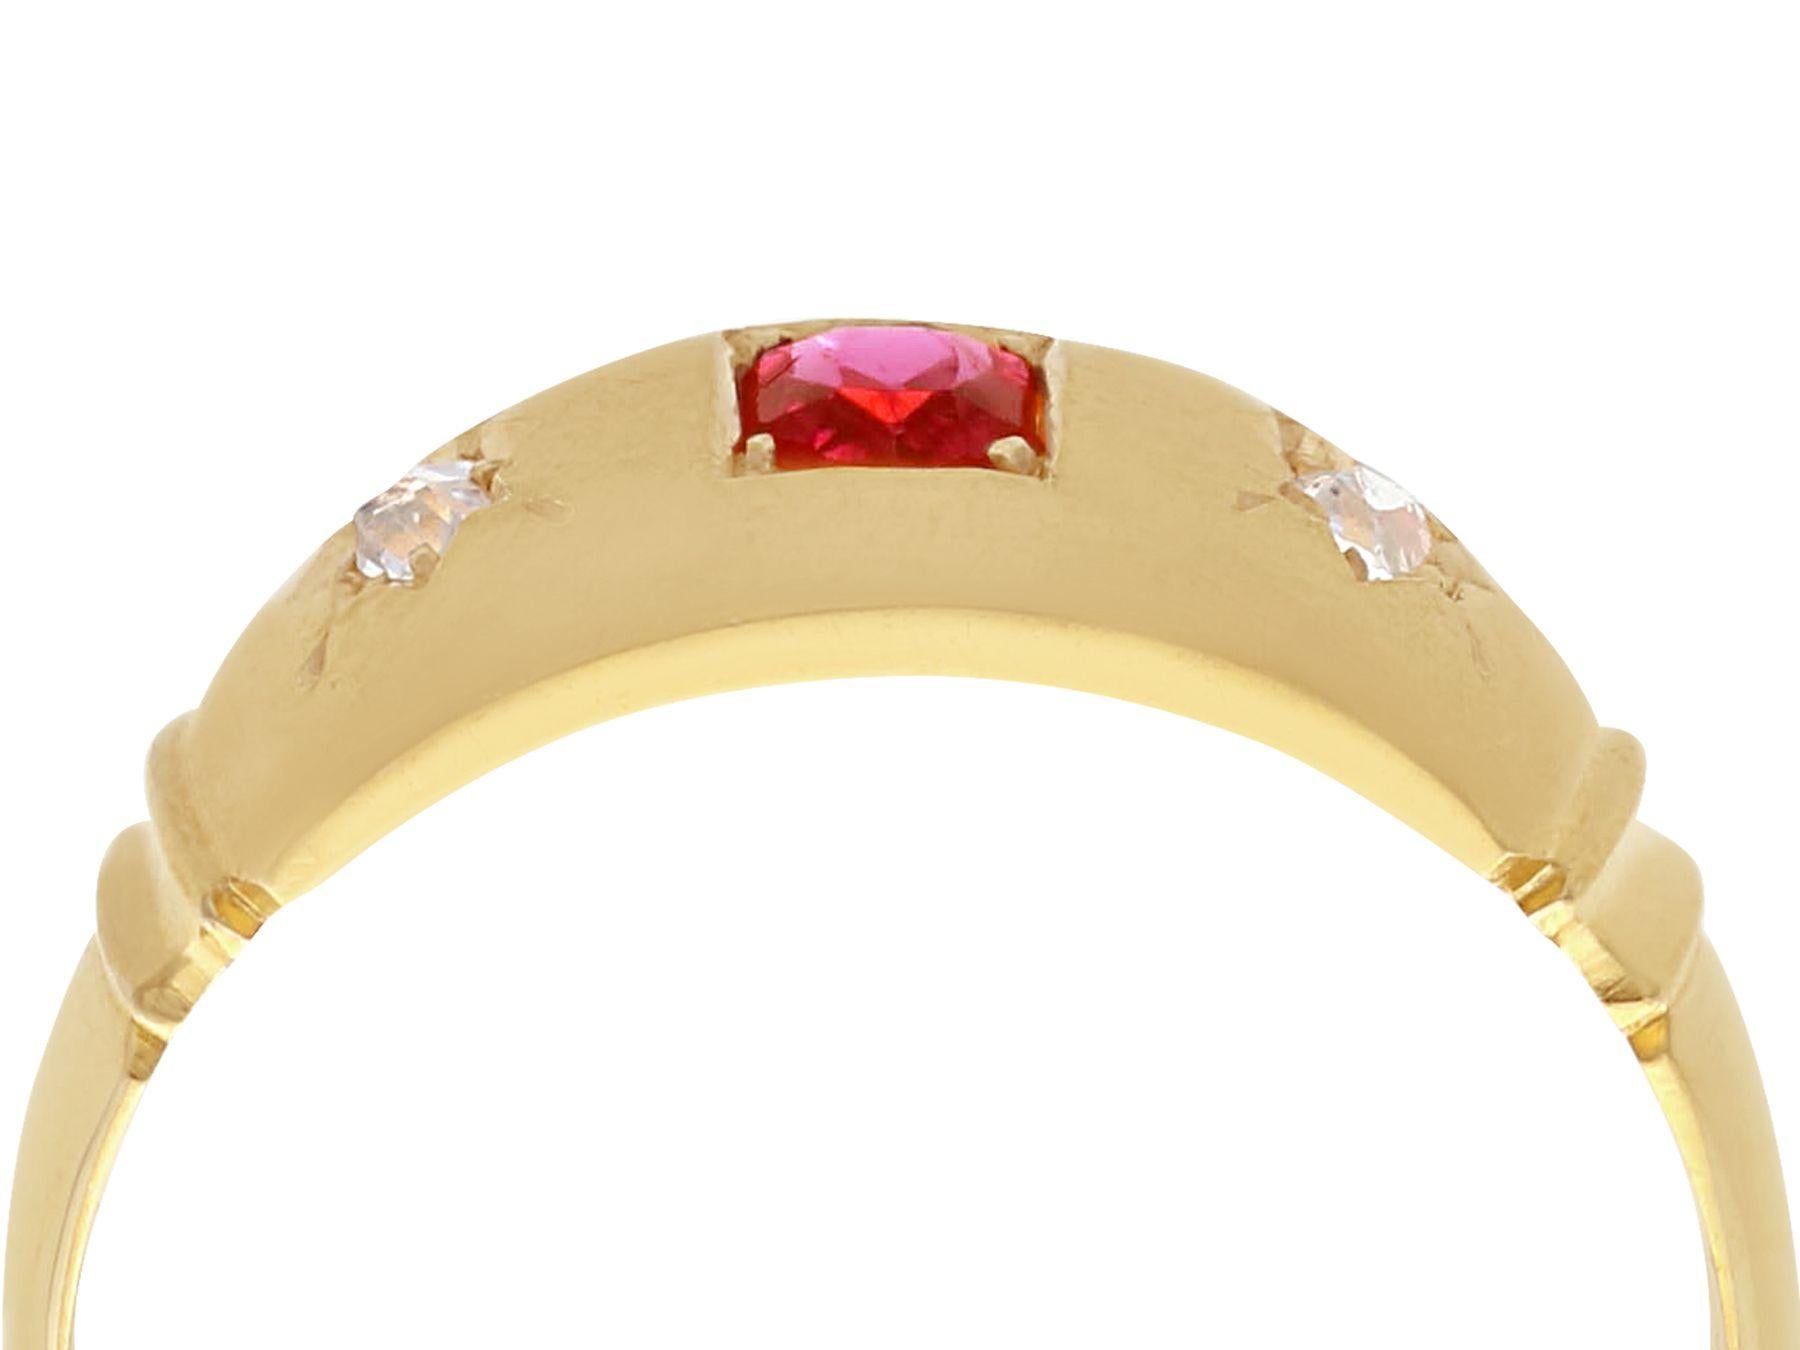 A fine antique 0.25 carat ruby and 0.08 carat diamond dress ring in 18 karat yellow gold; part of our antique jewelry and estate jewelry collections

This fine antique ruby and gold band ring has been crafted in 18k yellow gold.

The ring displays a